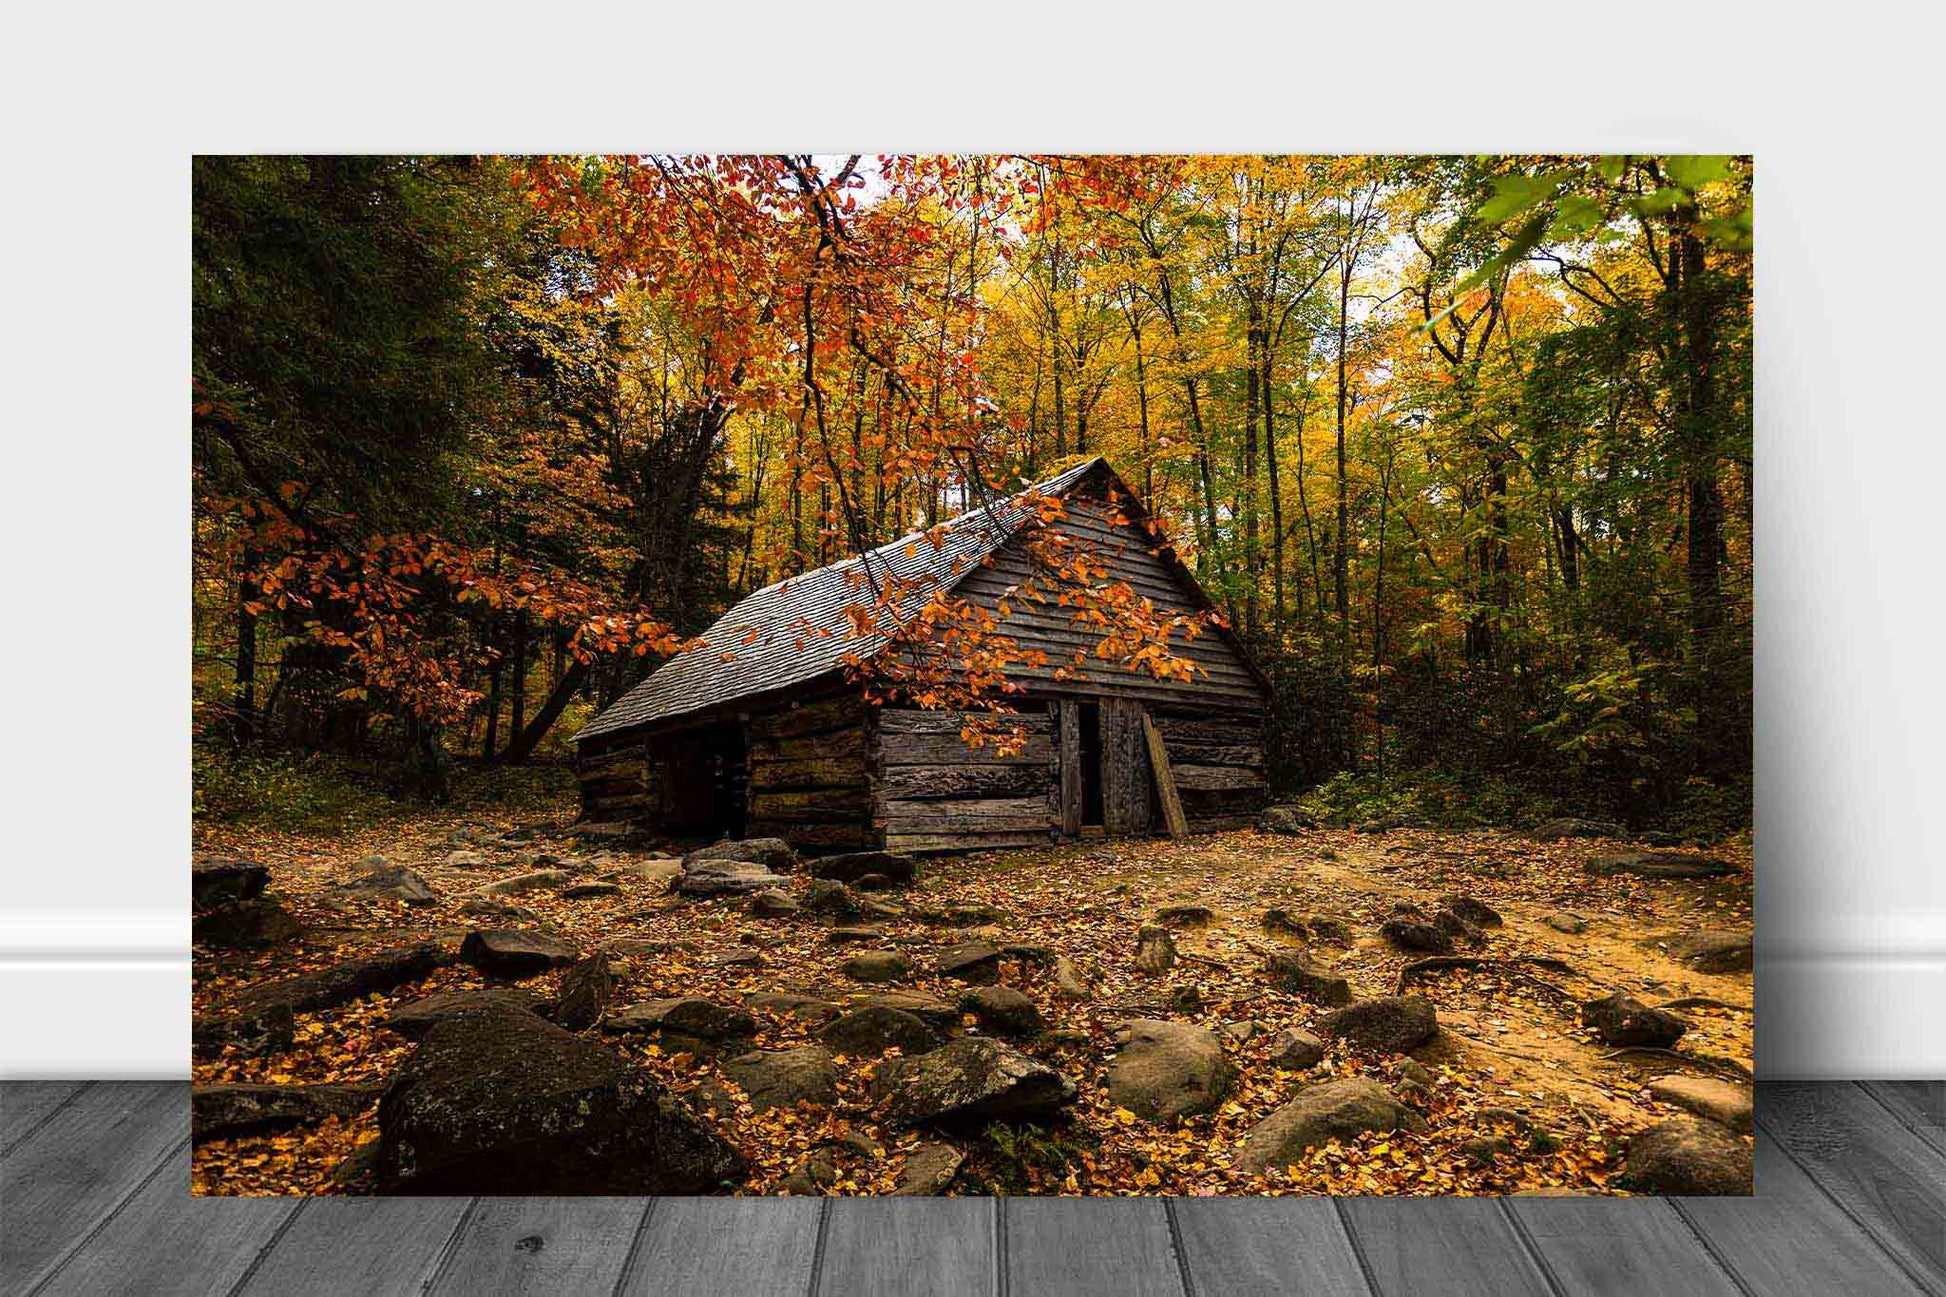 Country metal print on aluminum of an old barn surrounded by fall foliage on an autumn day in the Great Smoky Mountains near Gatlinburg, Tennessee by Sean Ramsey of Southern Plains Photography.